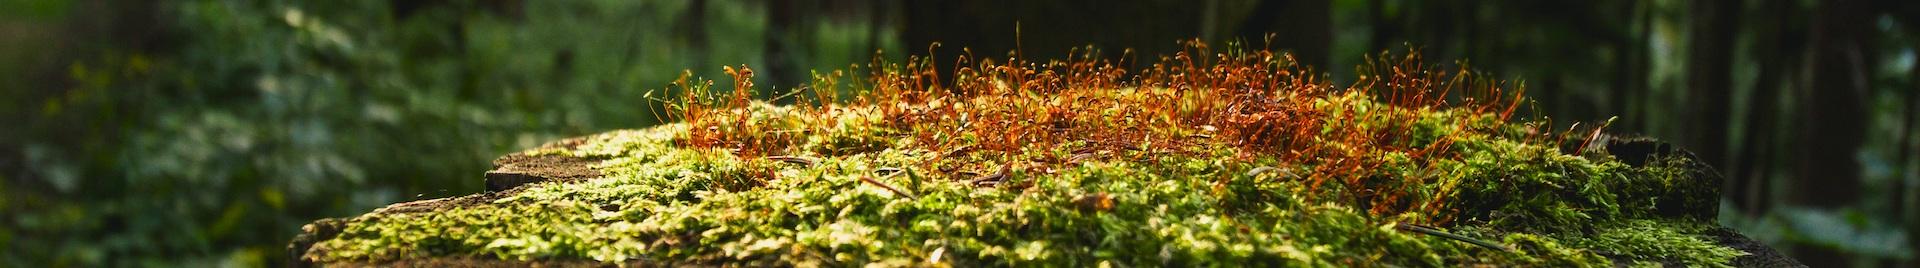 a picture of a tree stump with moss